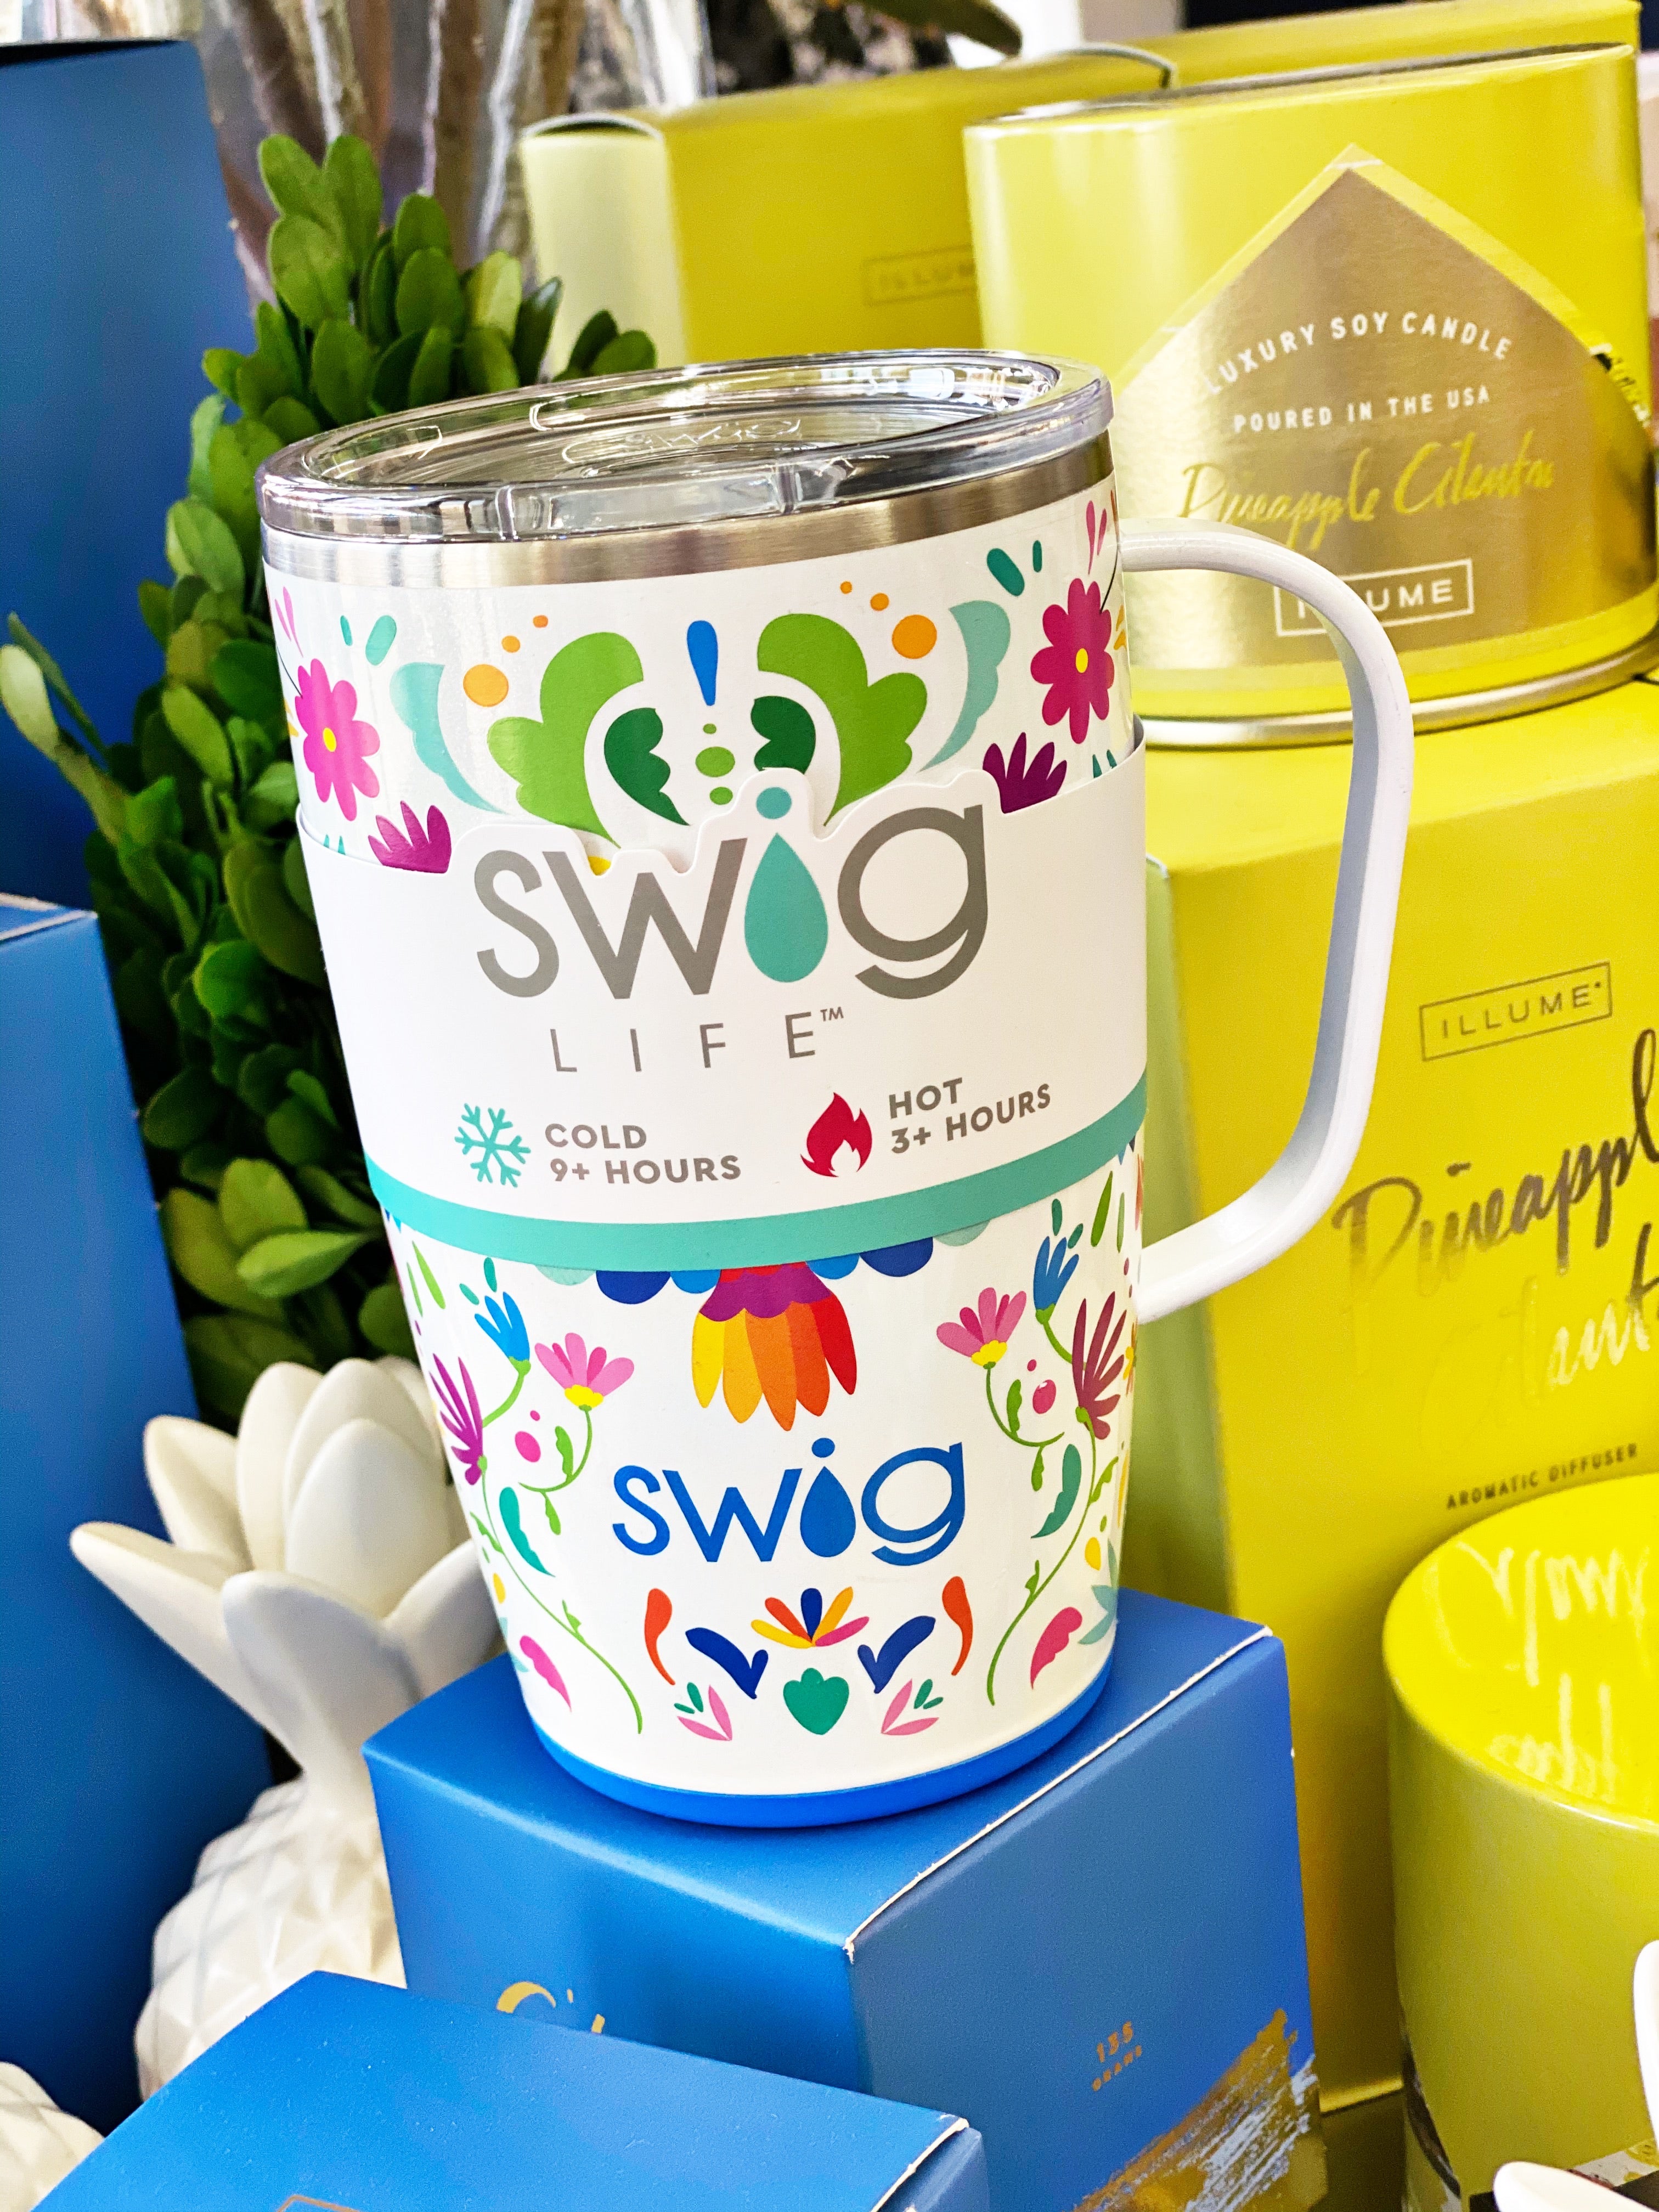 Swig 18oz Travel Mug, Insulated Tumbler with Handle and Lid, A Party Animal